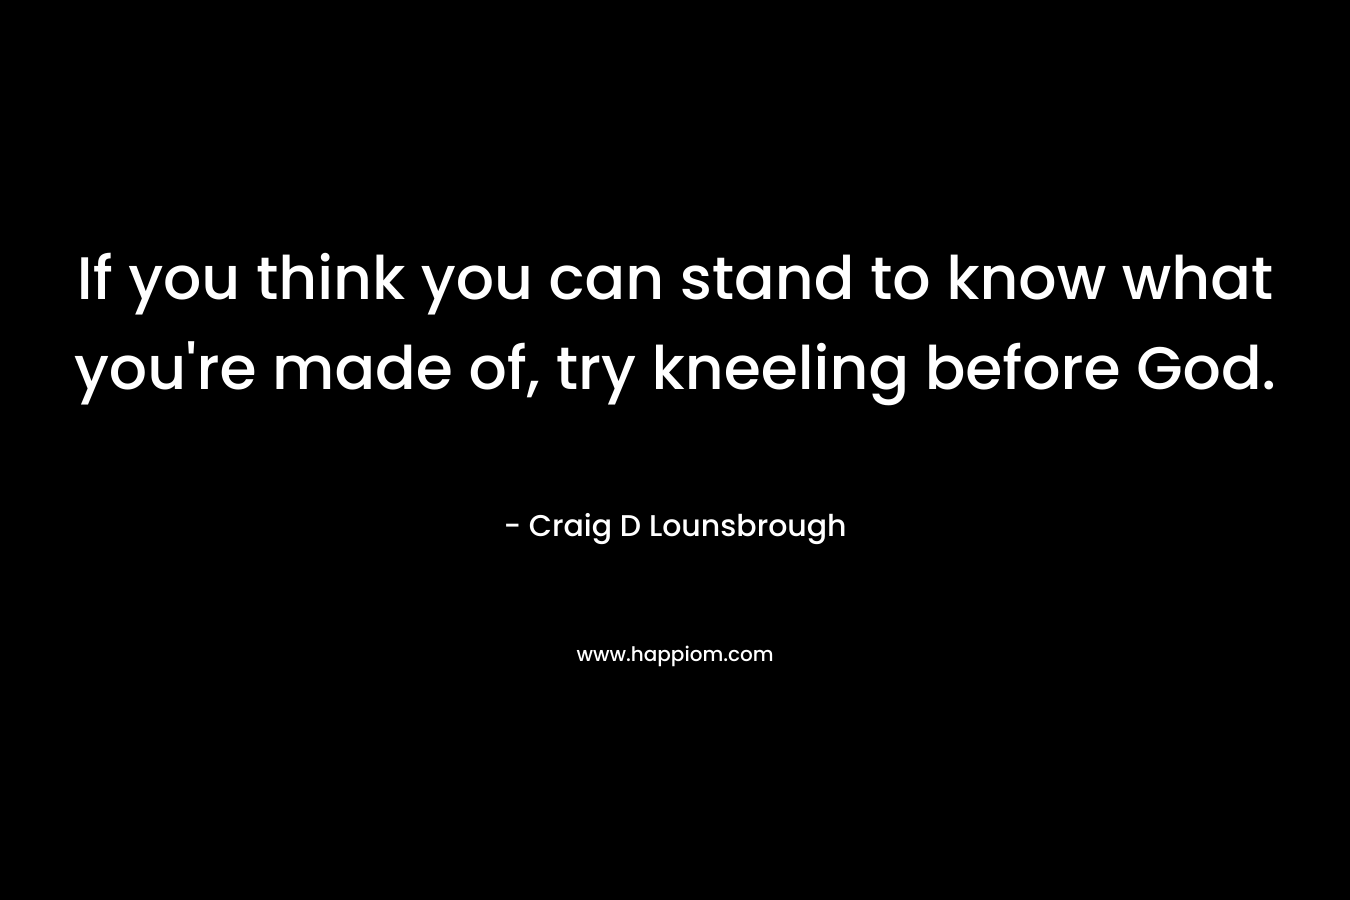 If you think you can stand to know what you’re made of, try kneeling before God. – Craig D Lounsbrough